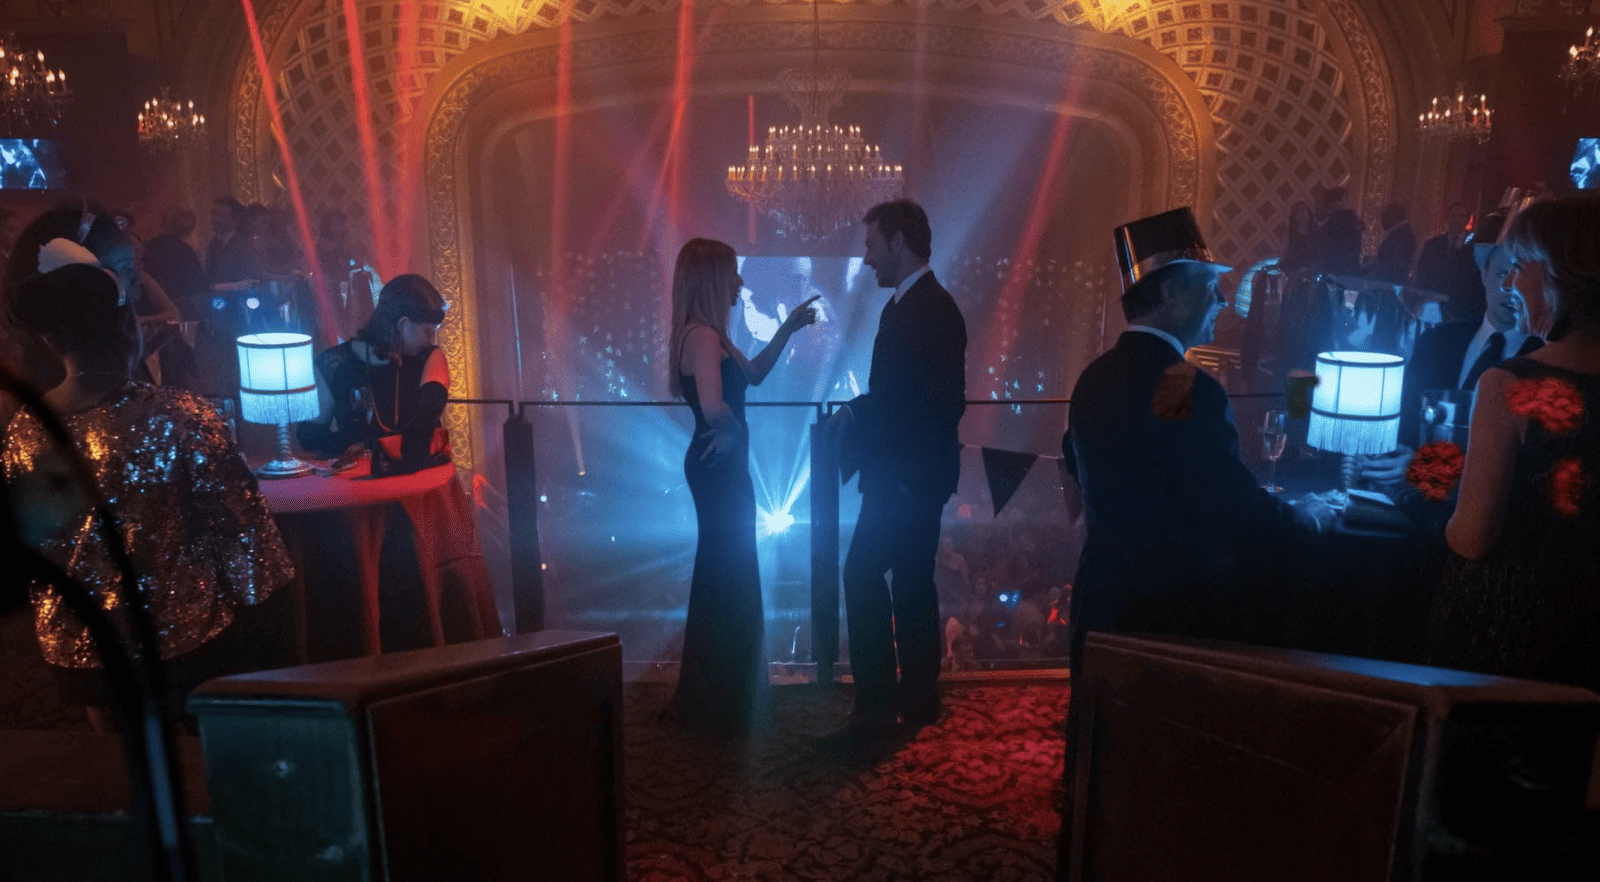 A dressed-up couple stands in a decked-out club in this image from Wonderland Sound and Vision.